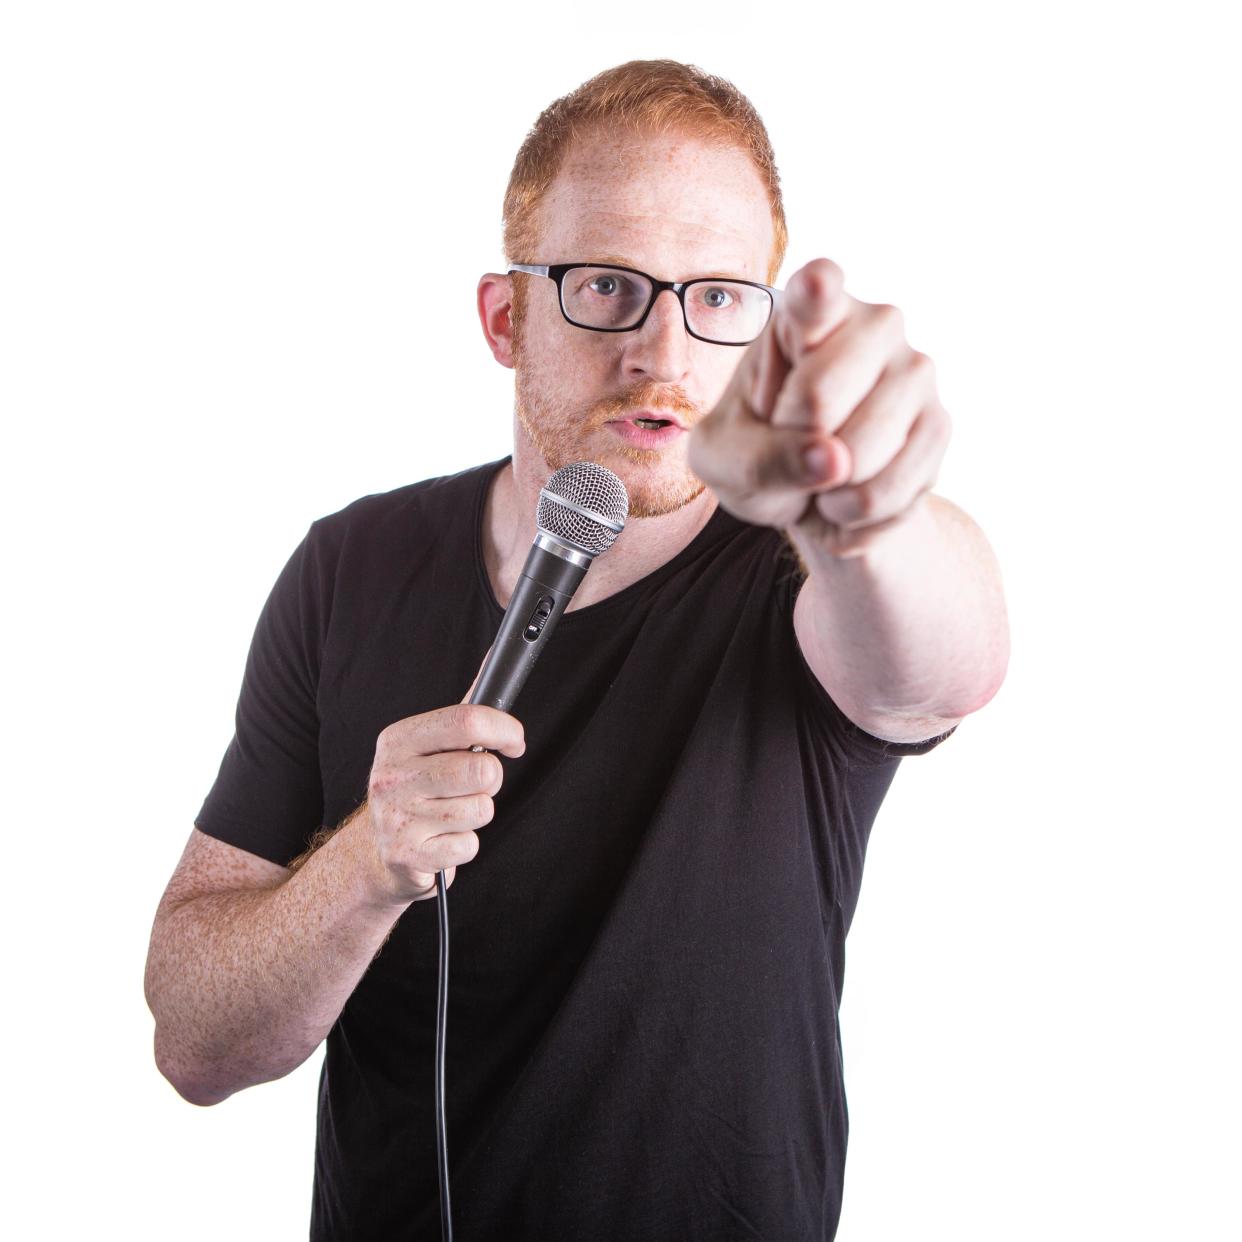 Comedian Steve Hofstetter appears Tuesday evening at Funny Bone Comedy Club.